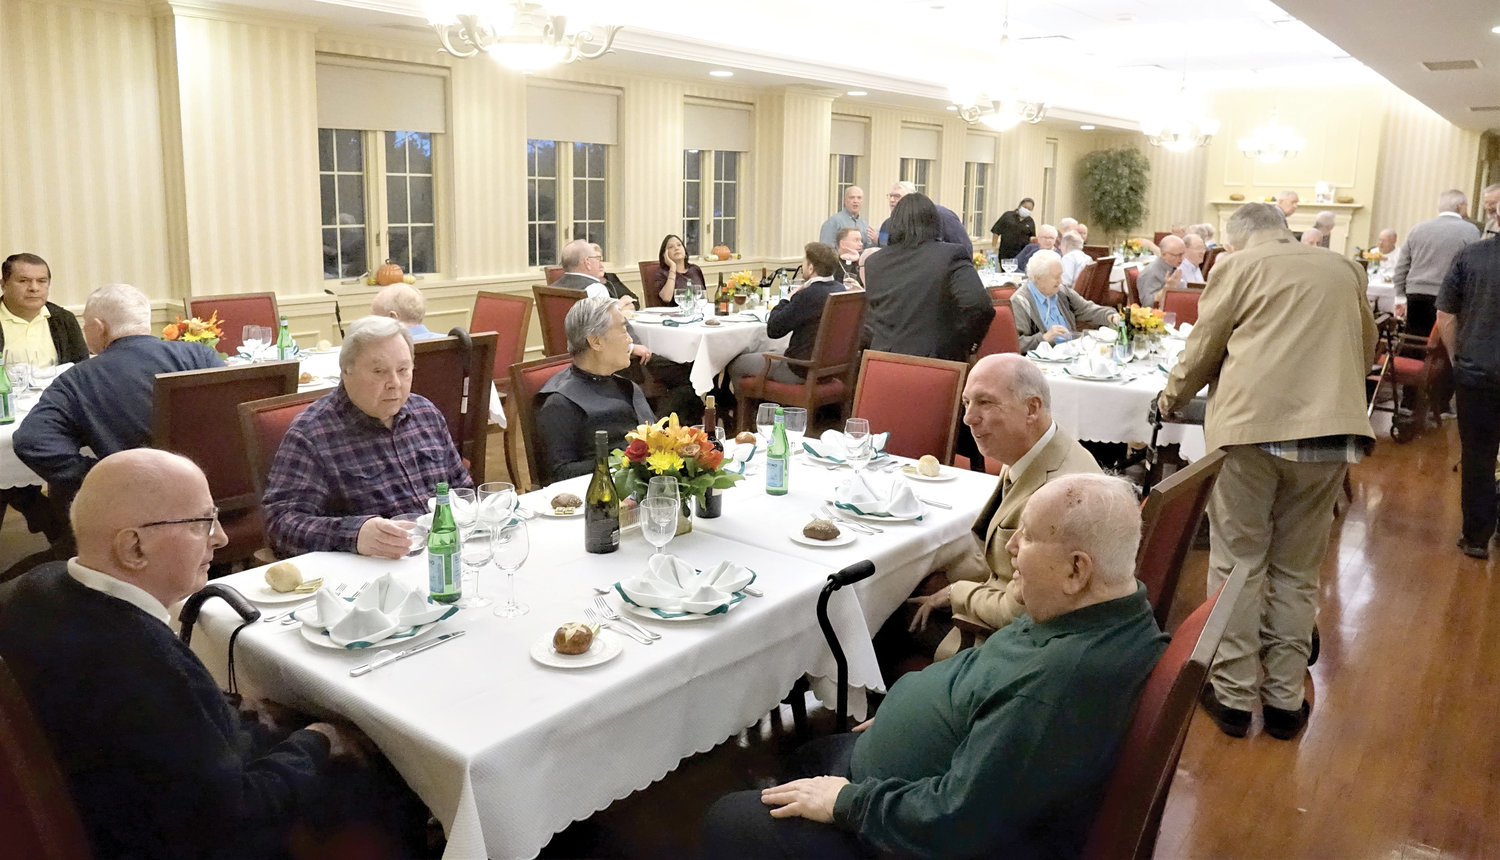 Priests enjoy a convivial evening Oct. 31 during an Oktoberfest celebration at St. John Vianney Clergy Residence in the Riverdale section of the Bronx.